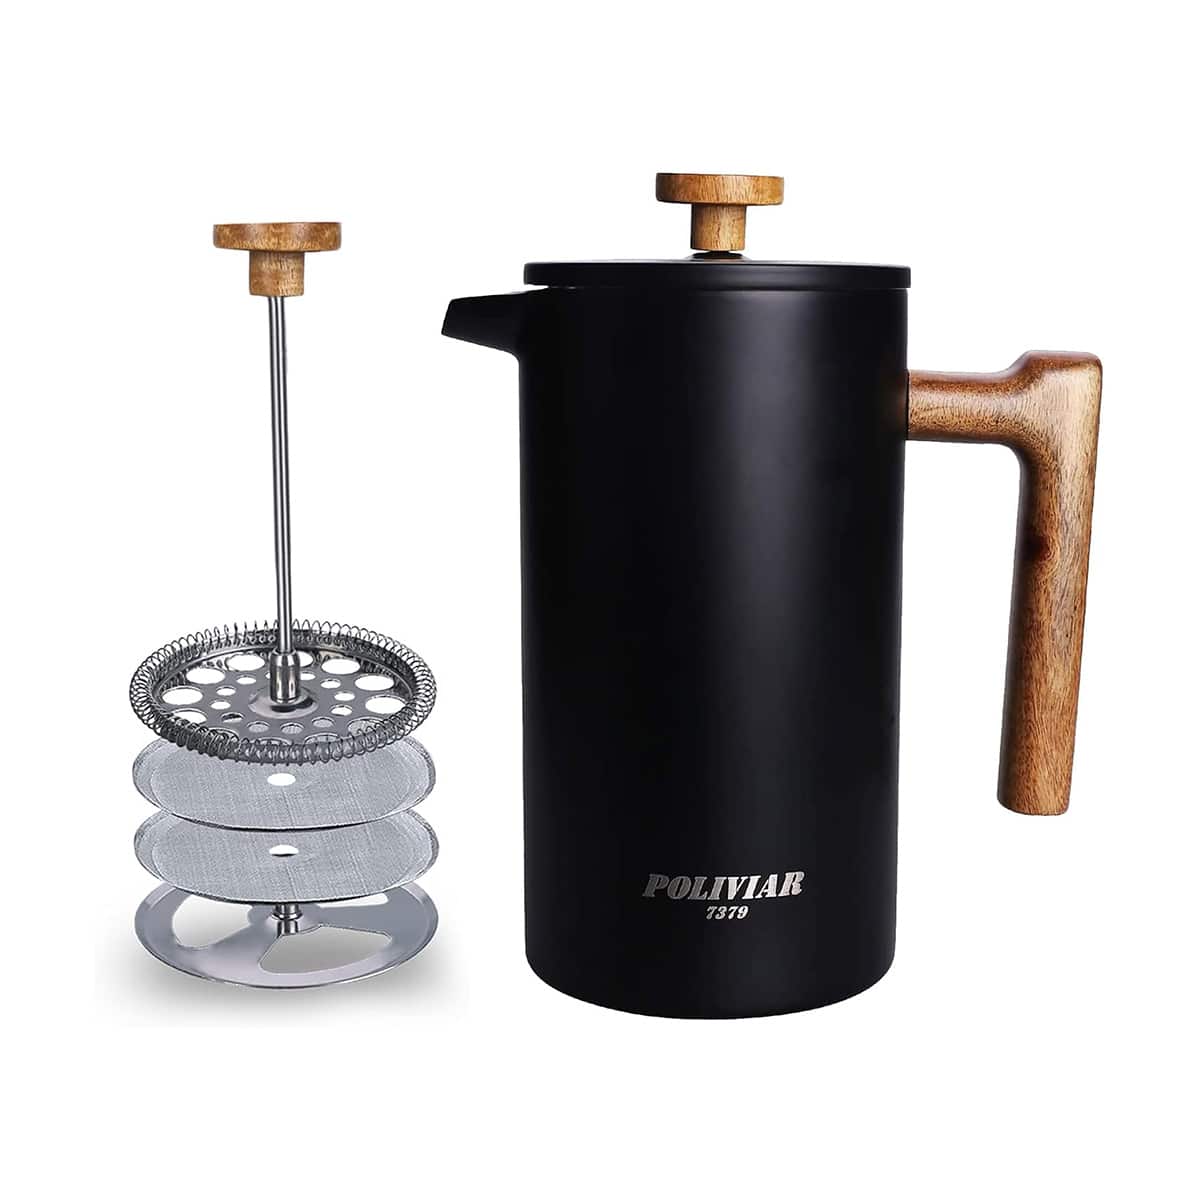 34oz French Press - great for Nourishing Herbal Infusions